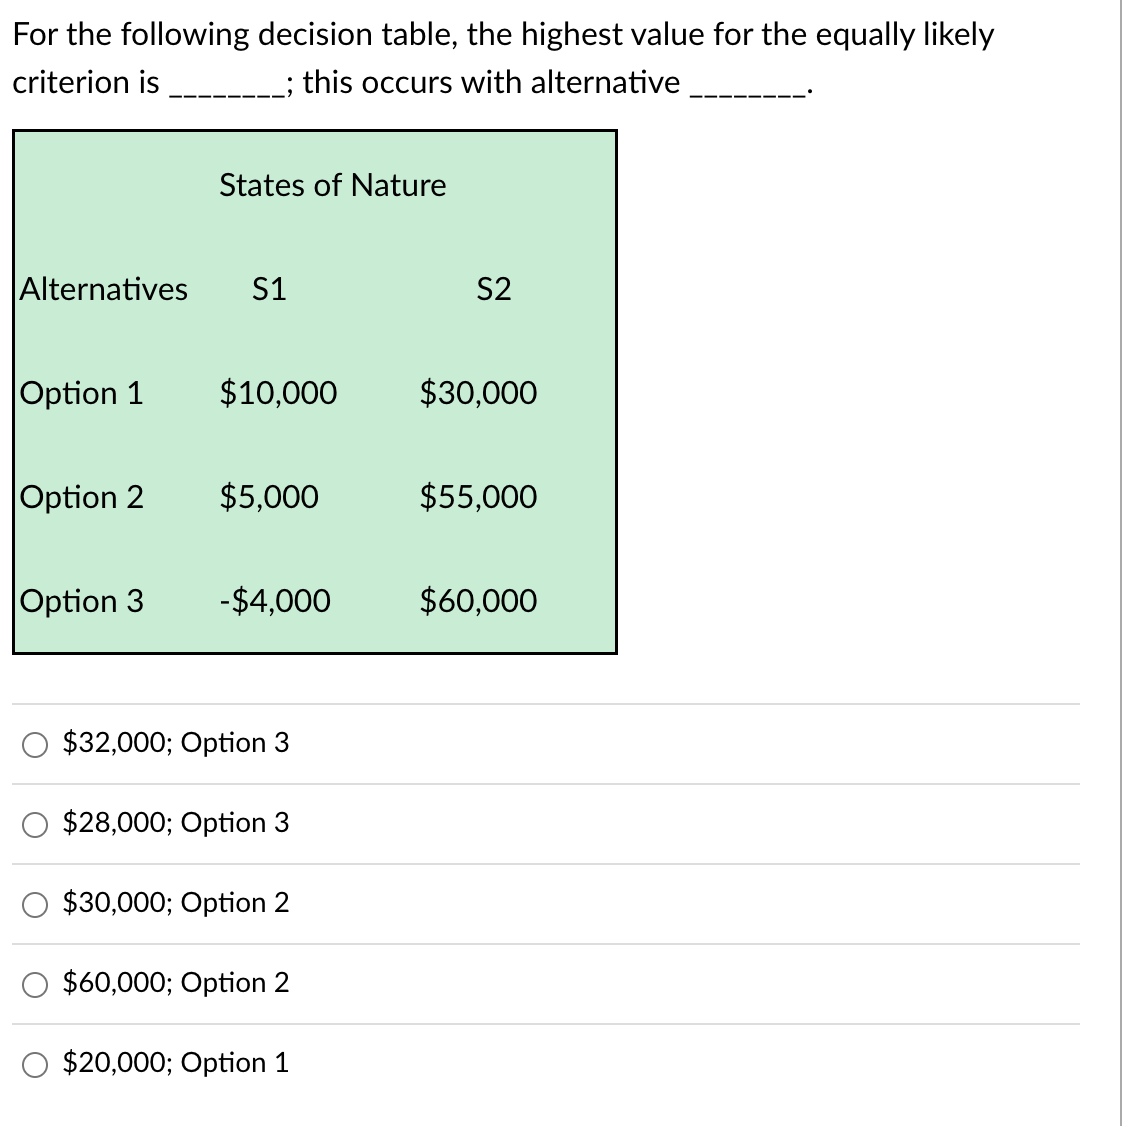 For the following decision table, the highest value for the equally likely
criterion is __________; this occurs with alternative
States of Nature
Alternatives
S1
S2
Option 1
$10,000
$30,000
Option 2 $5,000
$55,000
Option 3
-$4,000
$60,000
$32,000; Option 3
$28,000; Option 3
$30,000; Option 2
$60,000; Option 2
$20,000; Option 1